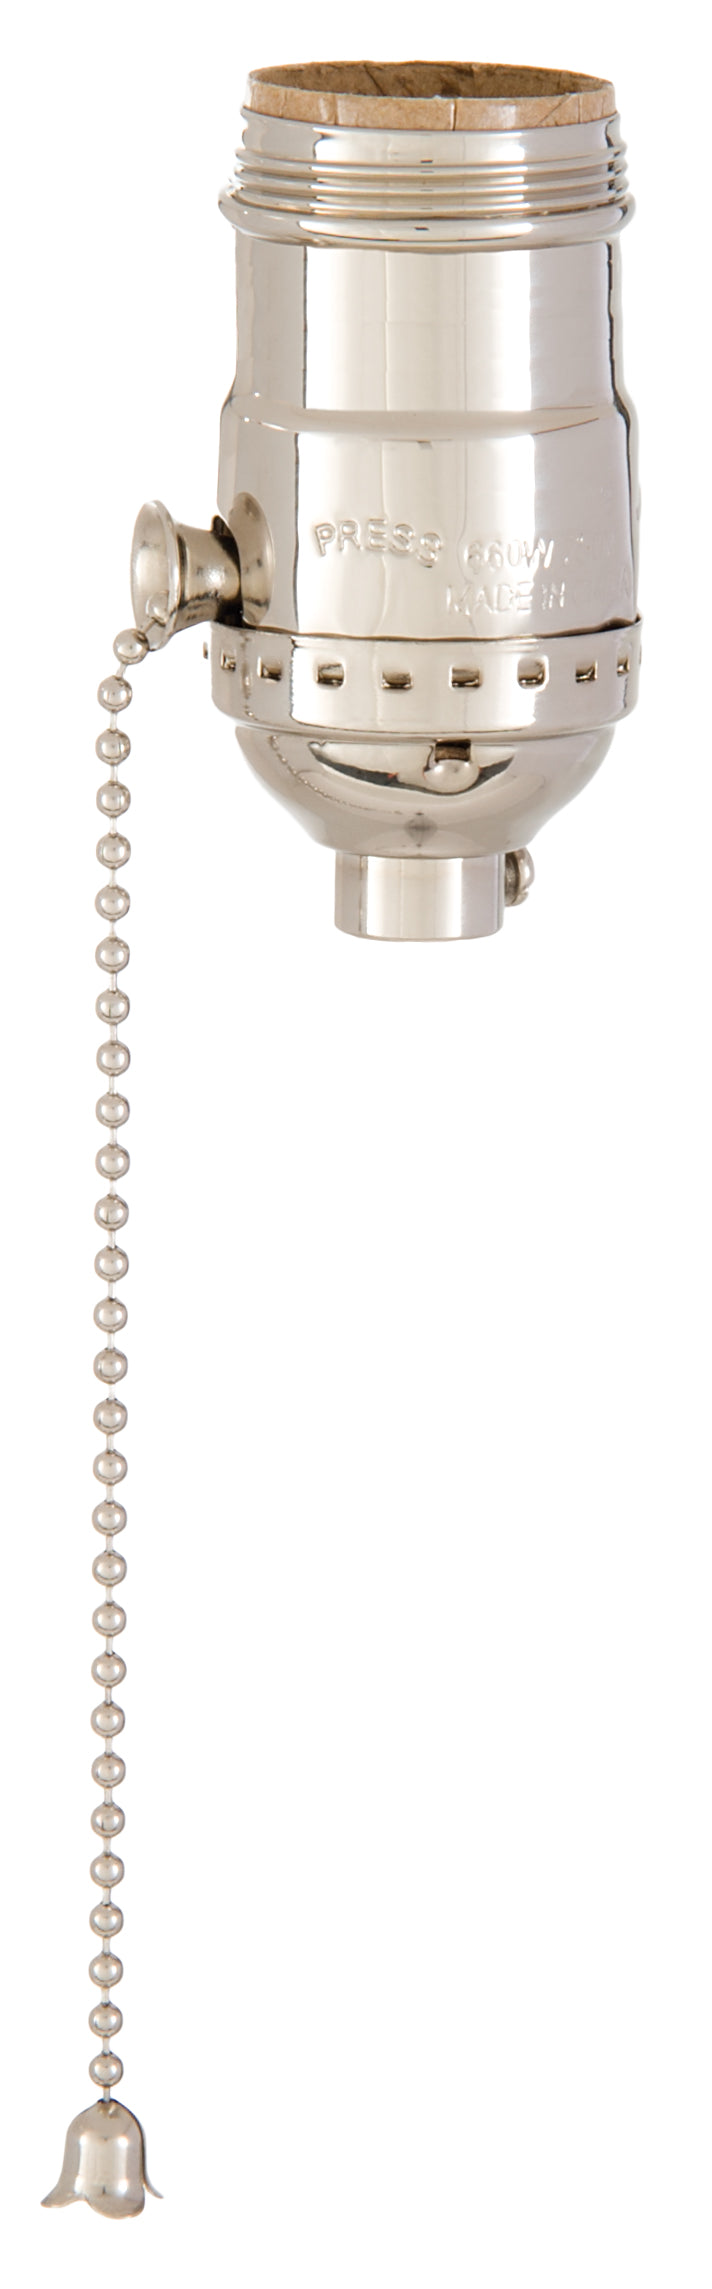 Nickel Plated Finish Brass Pull Chain Early Electric Style Lamp Socket, Pull Chain, On/Off function, UNO Thread